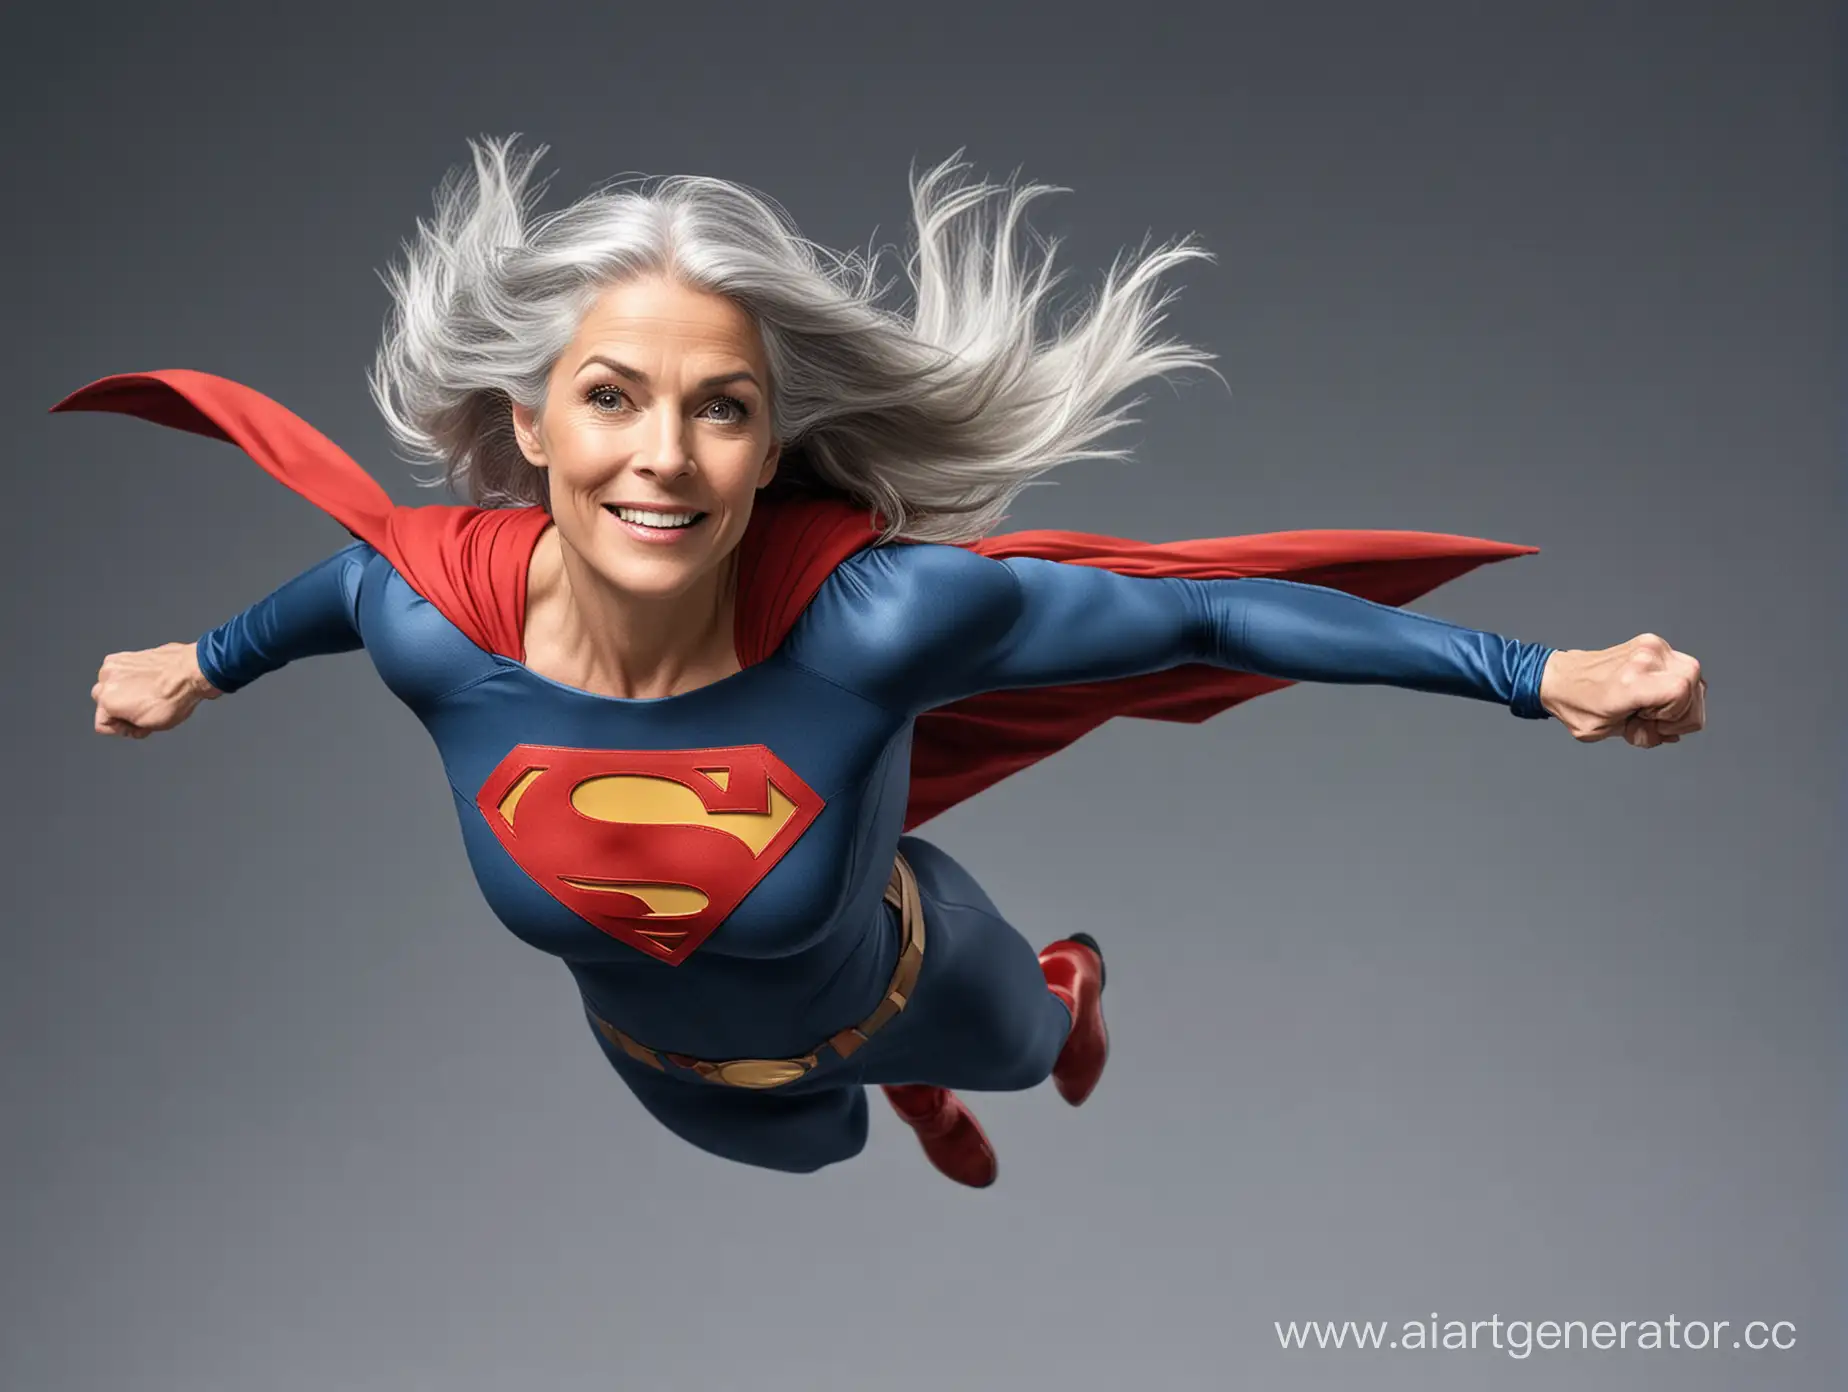 A pretty woman with gray hair, age 60, she is flying like Superman, her body is very muscular, she is wearing the classic Superman costume